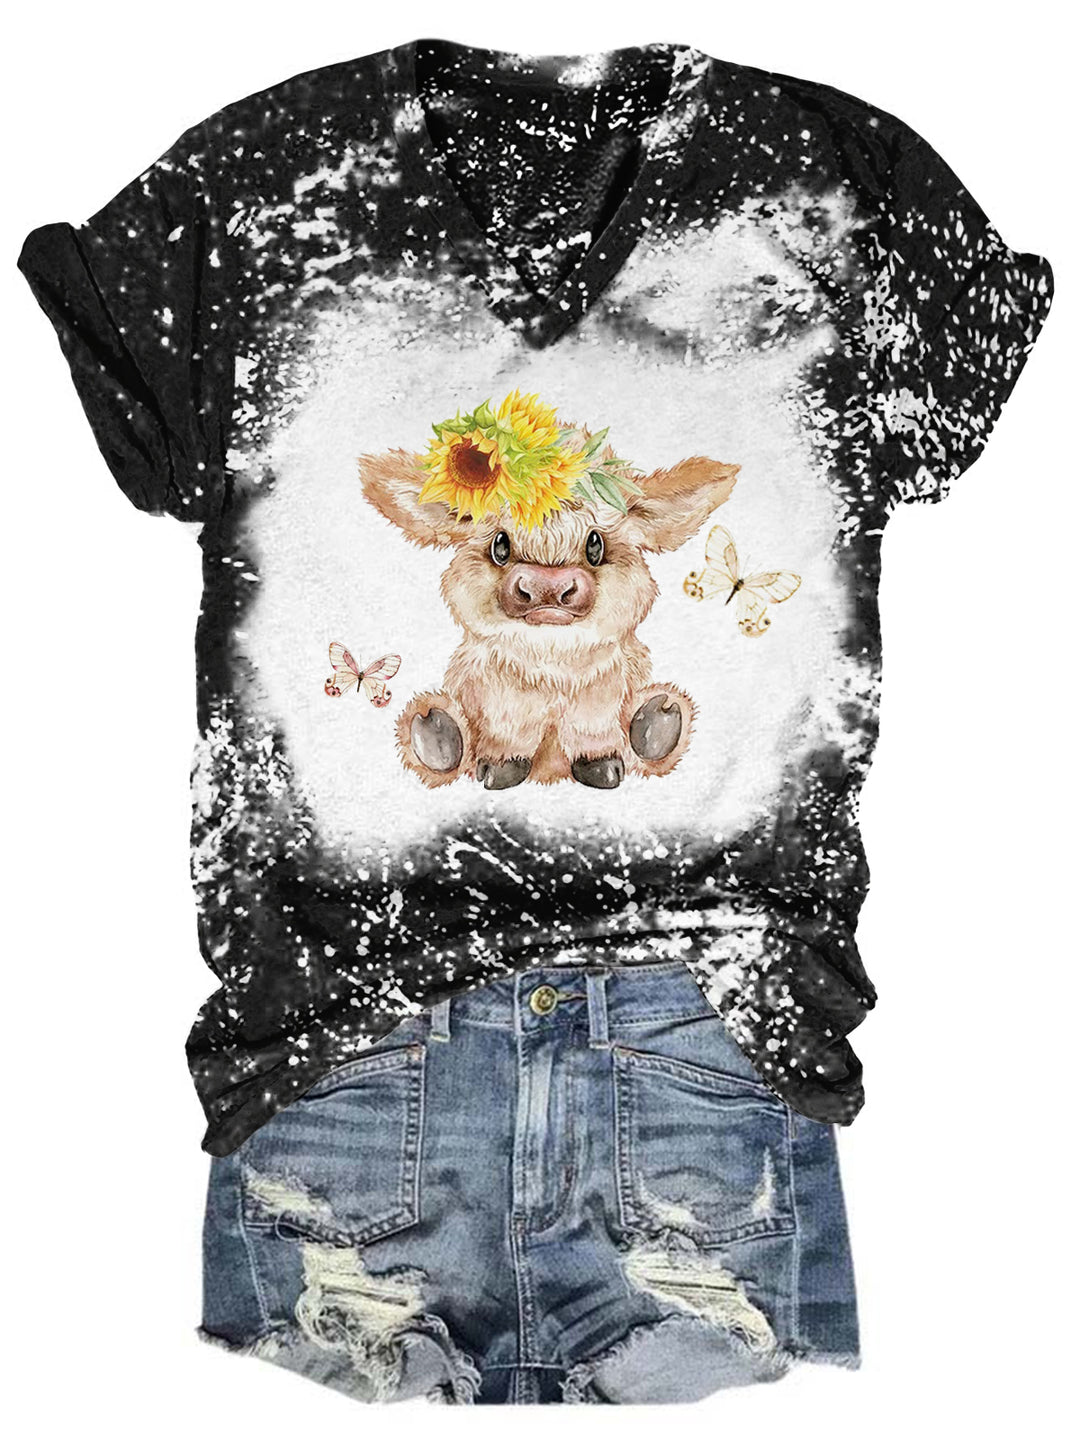 Highland Cow And Butterflies Tie Dye V Neck T-shirt